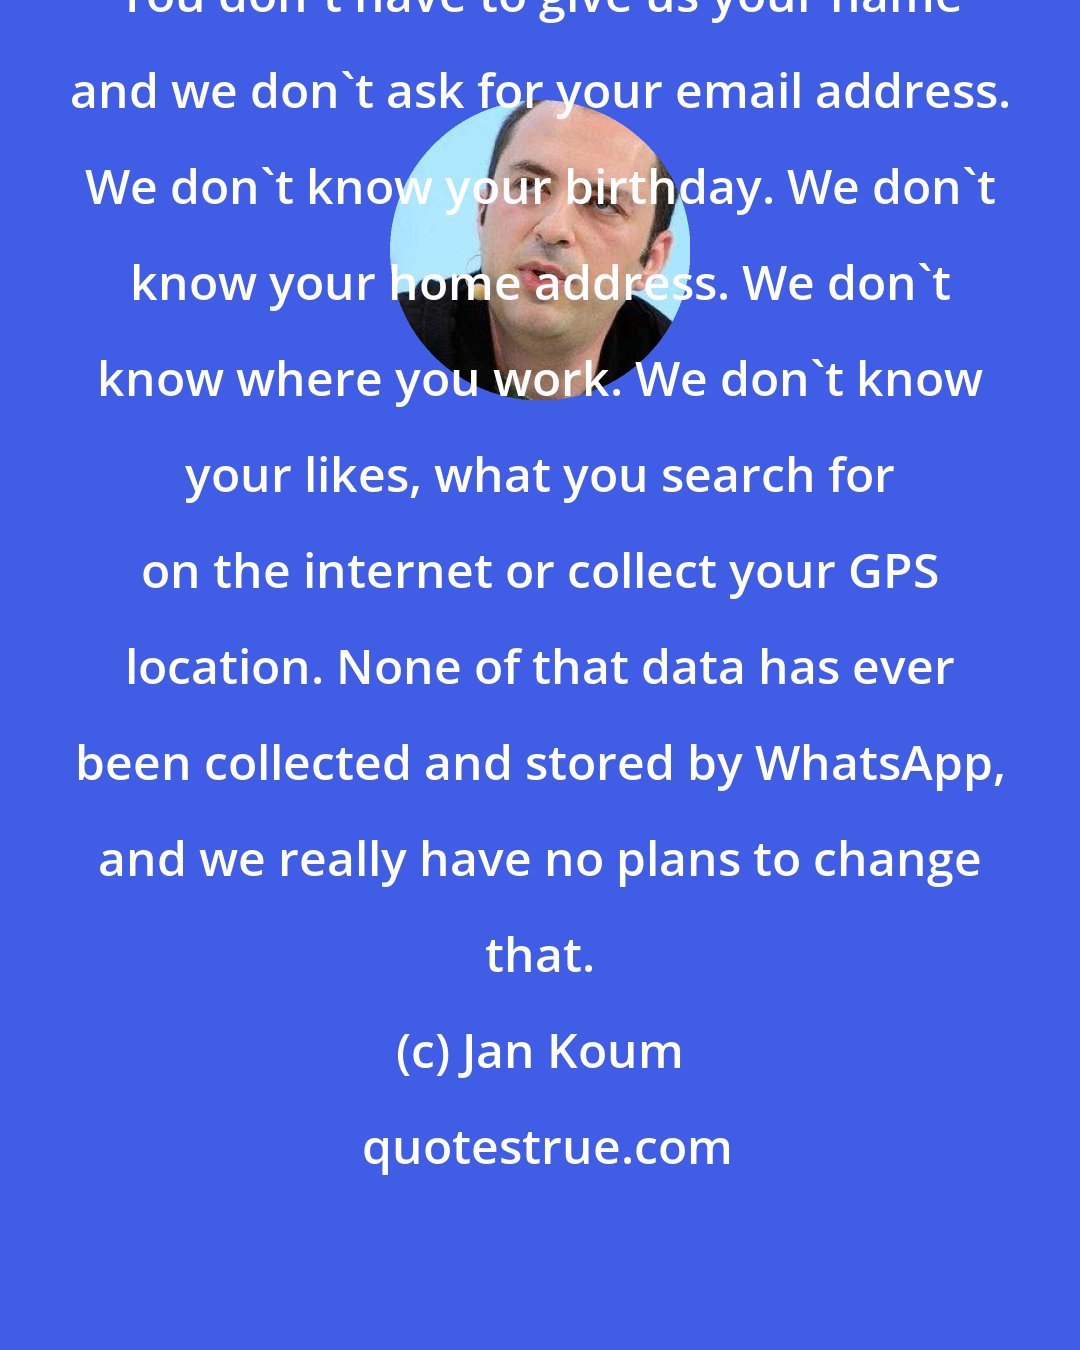 Jan Koum: You don't have to give us your name and we don't ask for your email address. We don't know your birthday. We don't know your home address. We don't know where you work. We don't know your likes, what you search for on the internet or collect your GPS location. None of that data has ever been collected and stored by WhatsApp, and we really have no plans to change that.